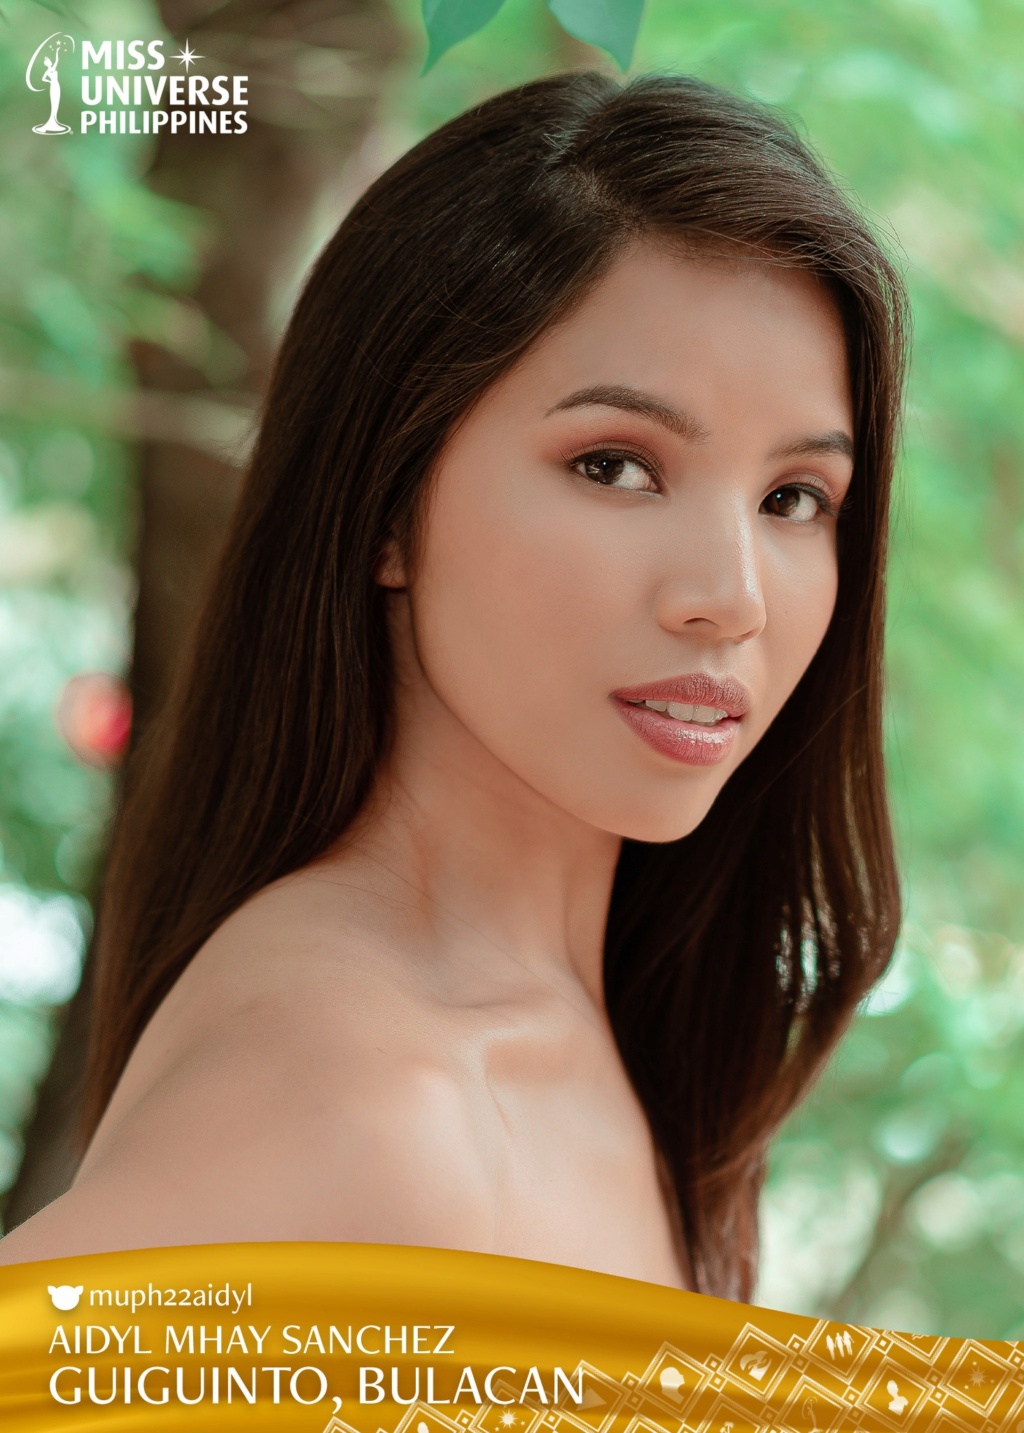 ROAD TO MISS UNIVERSE PHILIPPINES 2022 is is Miss Pasay, Celeste Cortesi - Page 5 27566910